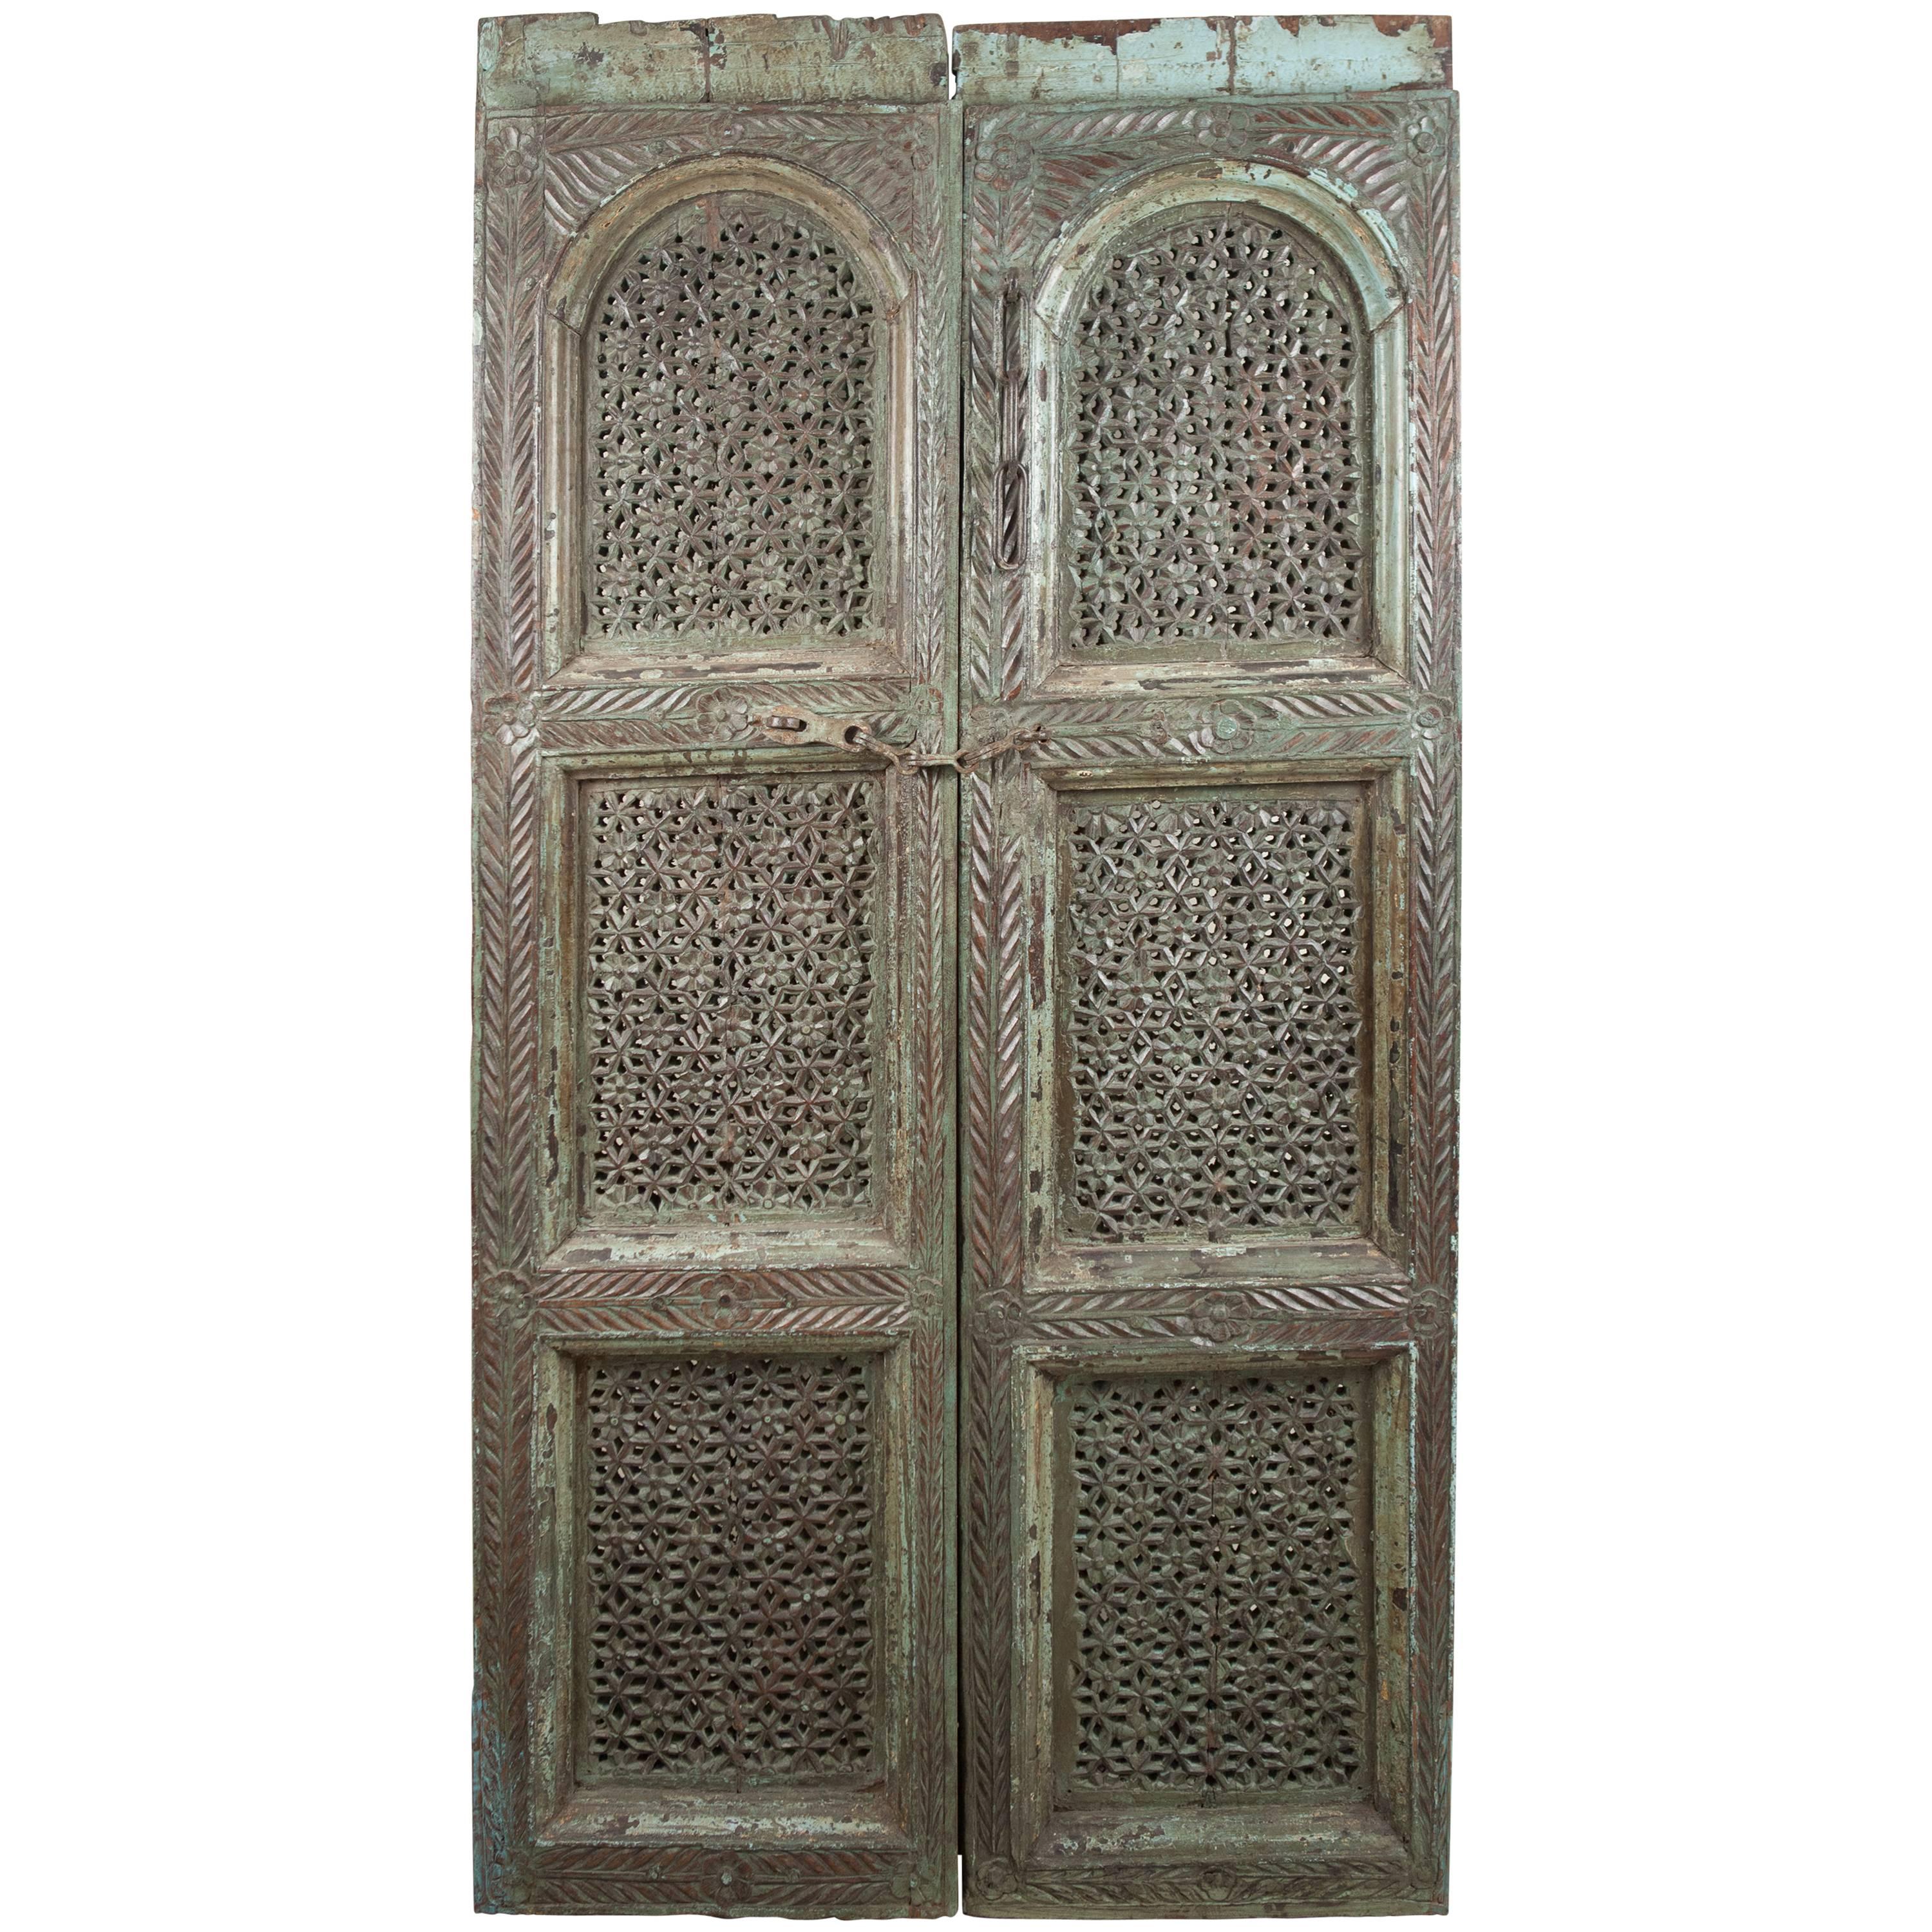 Carved, Painted Wood Door from India